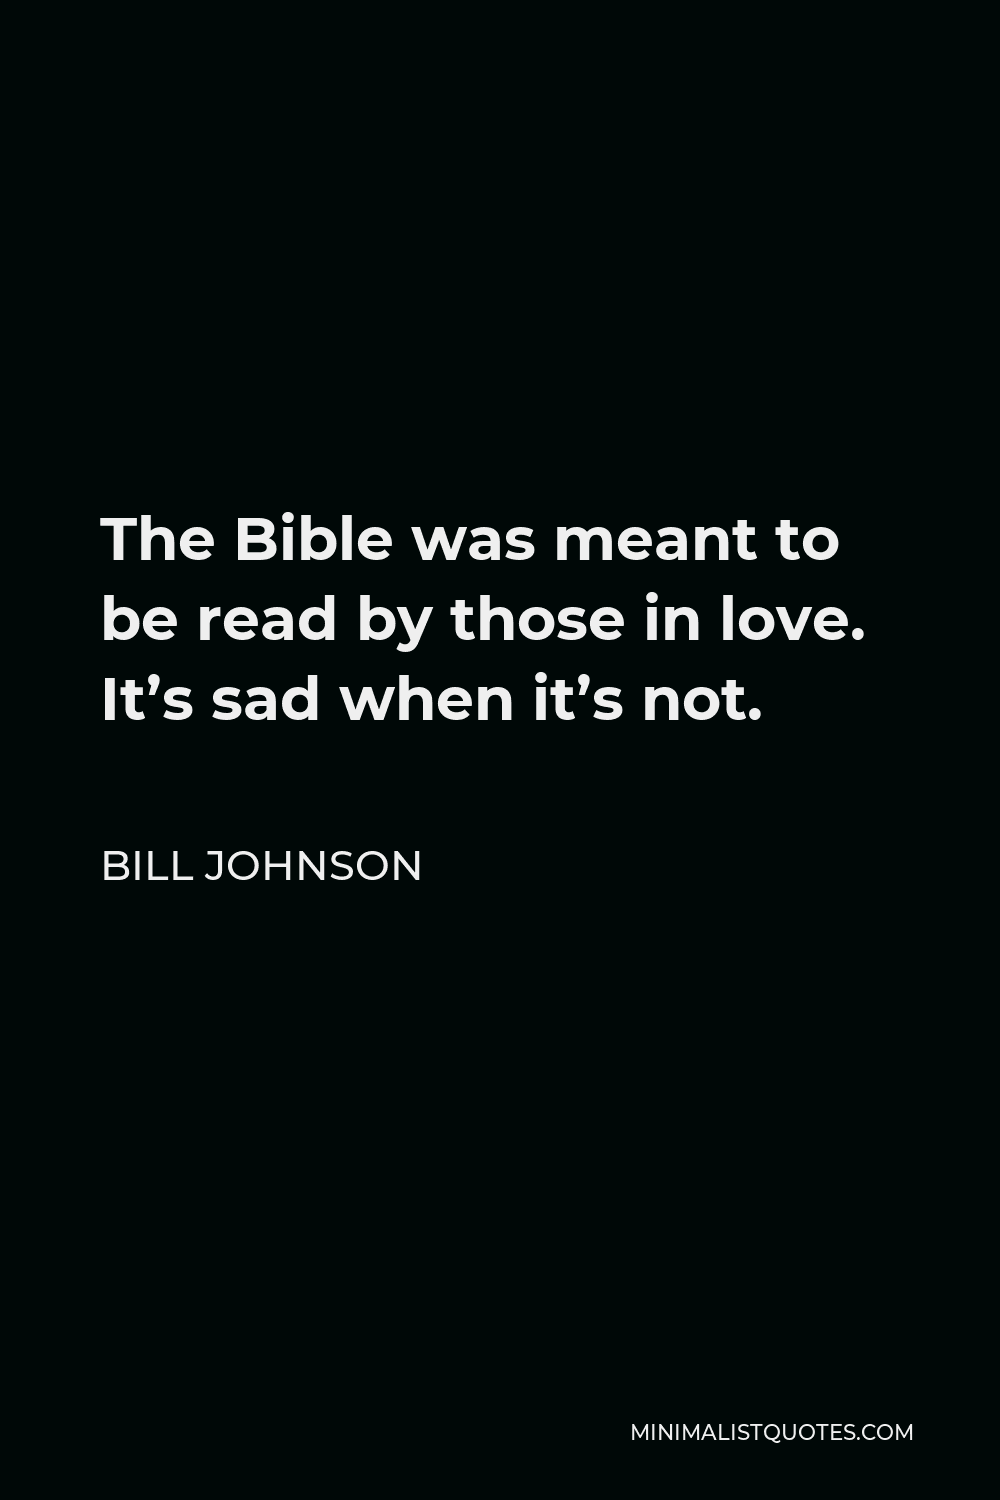 Bill Johnson Quote - The Bible was meant to be read by those in love. It’s sad when it’s not.